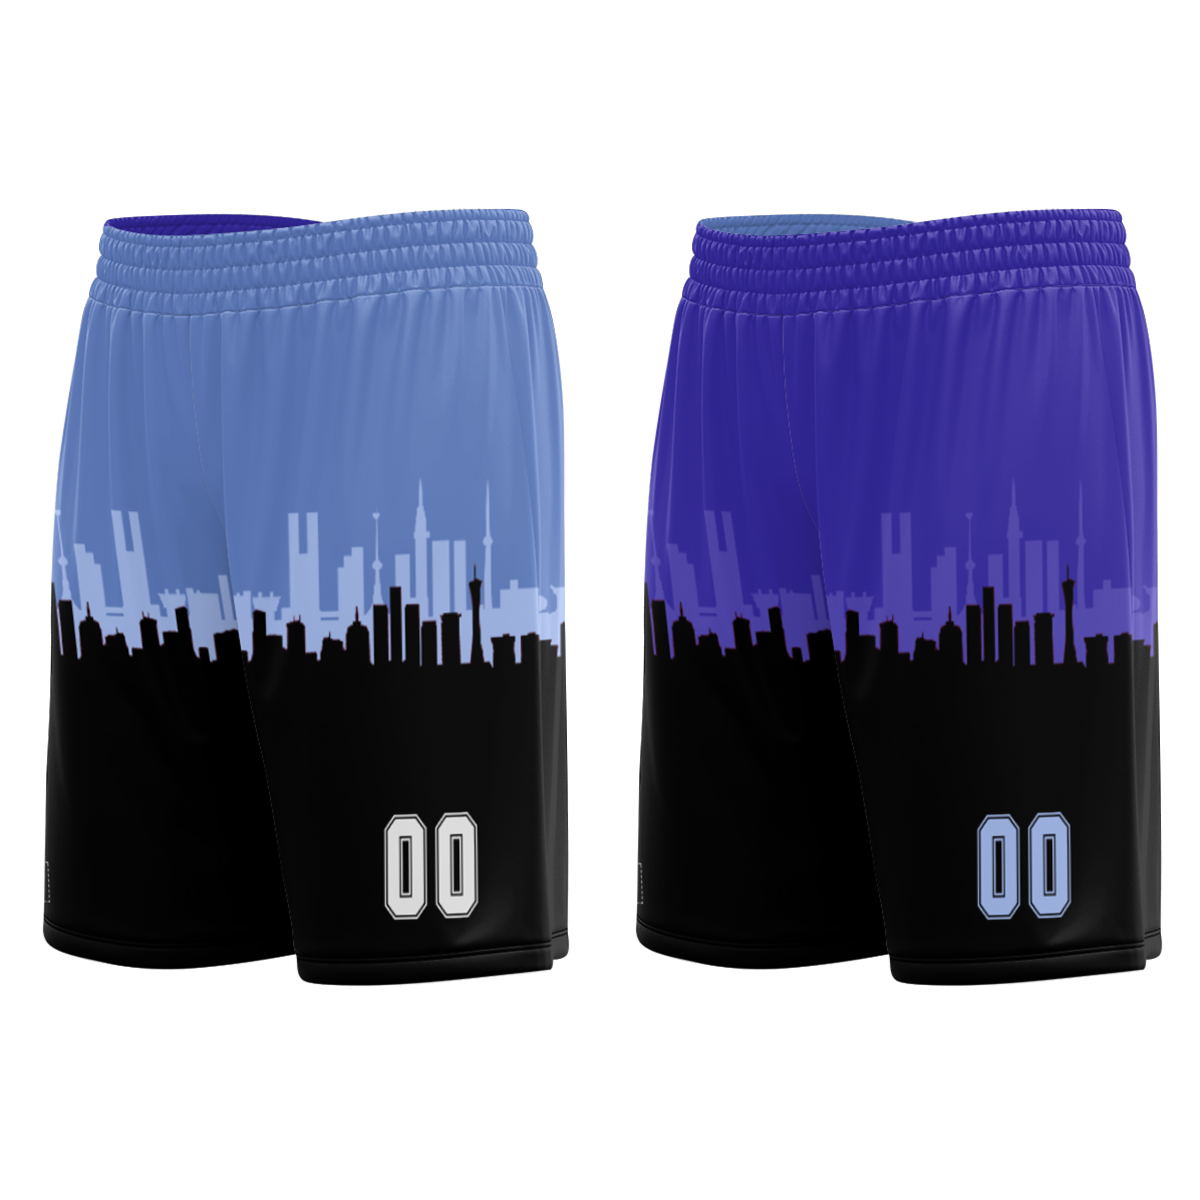 new-design-sublimation-basketball-jersey-uniform-for-teenager-and-adult-with-custom-logo-at-cj-pod-8